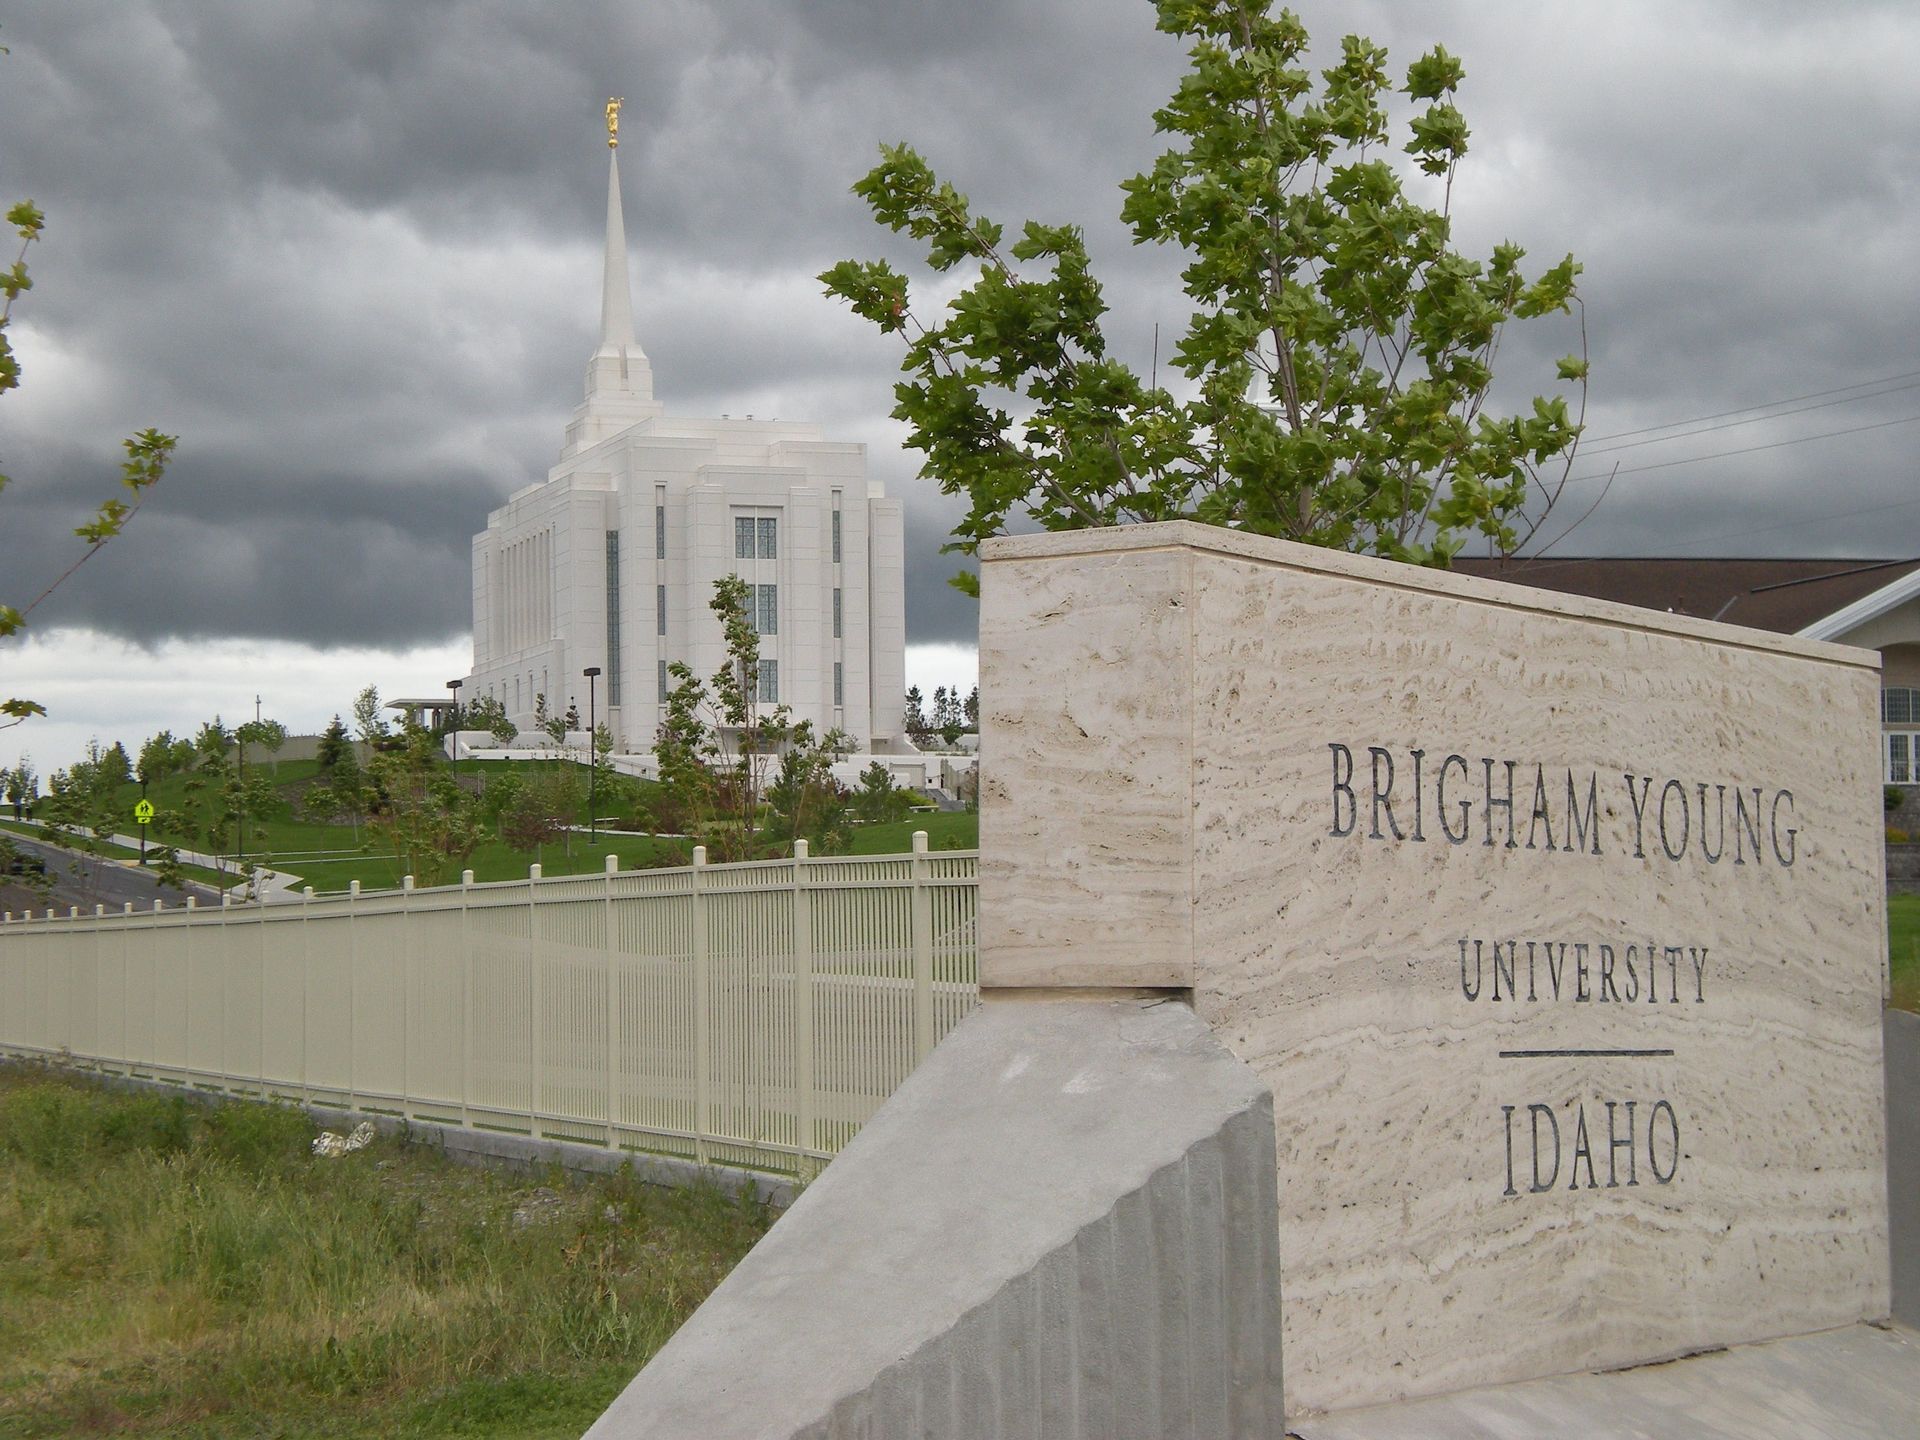 The entire Rexburg Idaho Temple, including the school, name sign, and scenery.